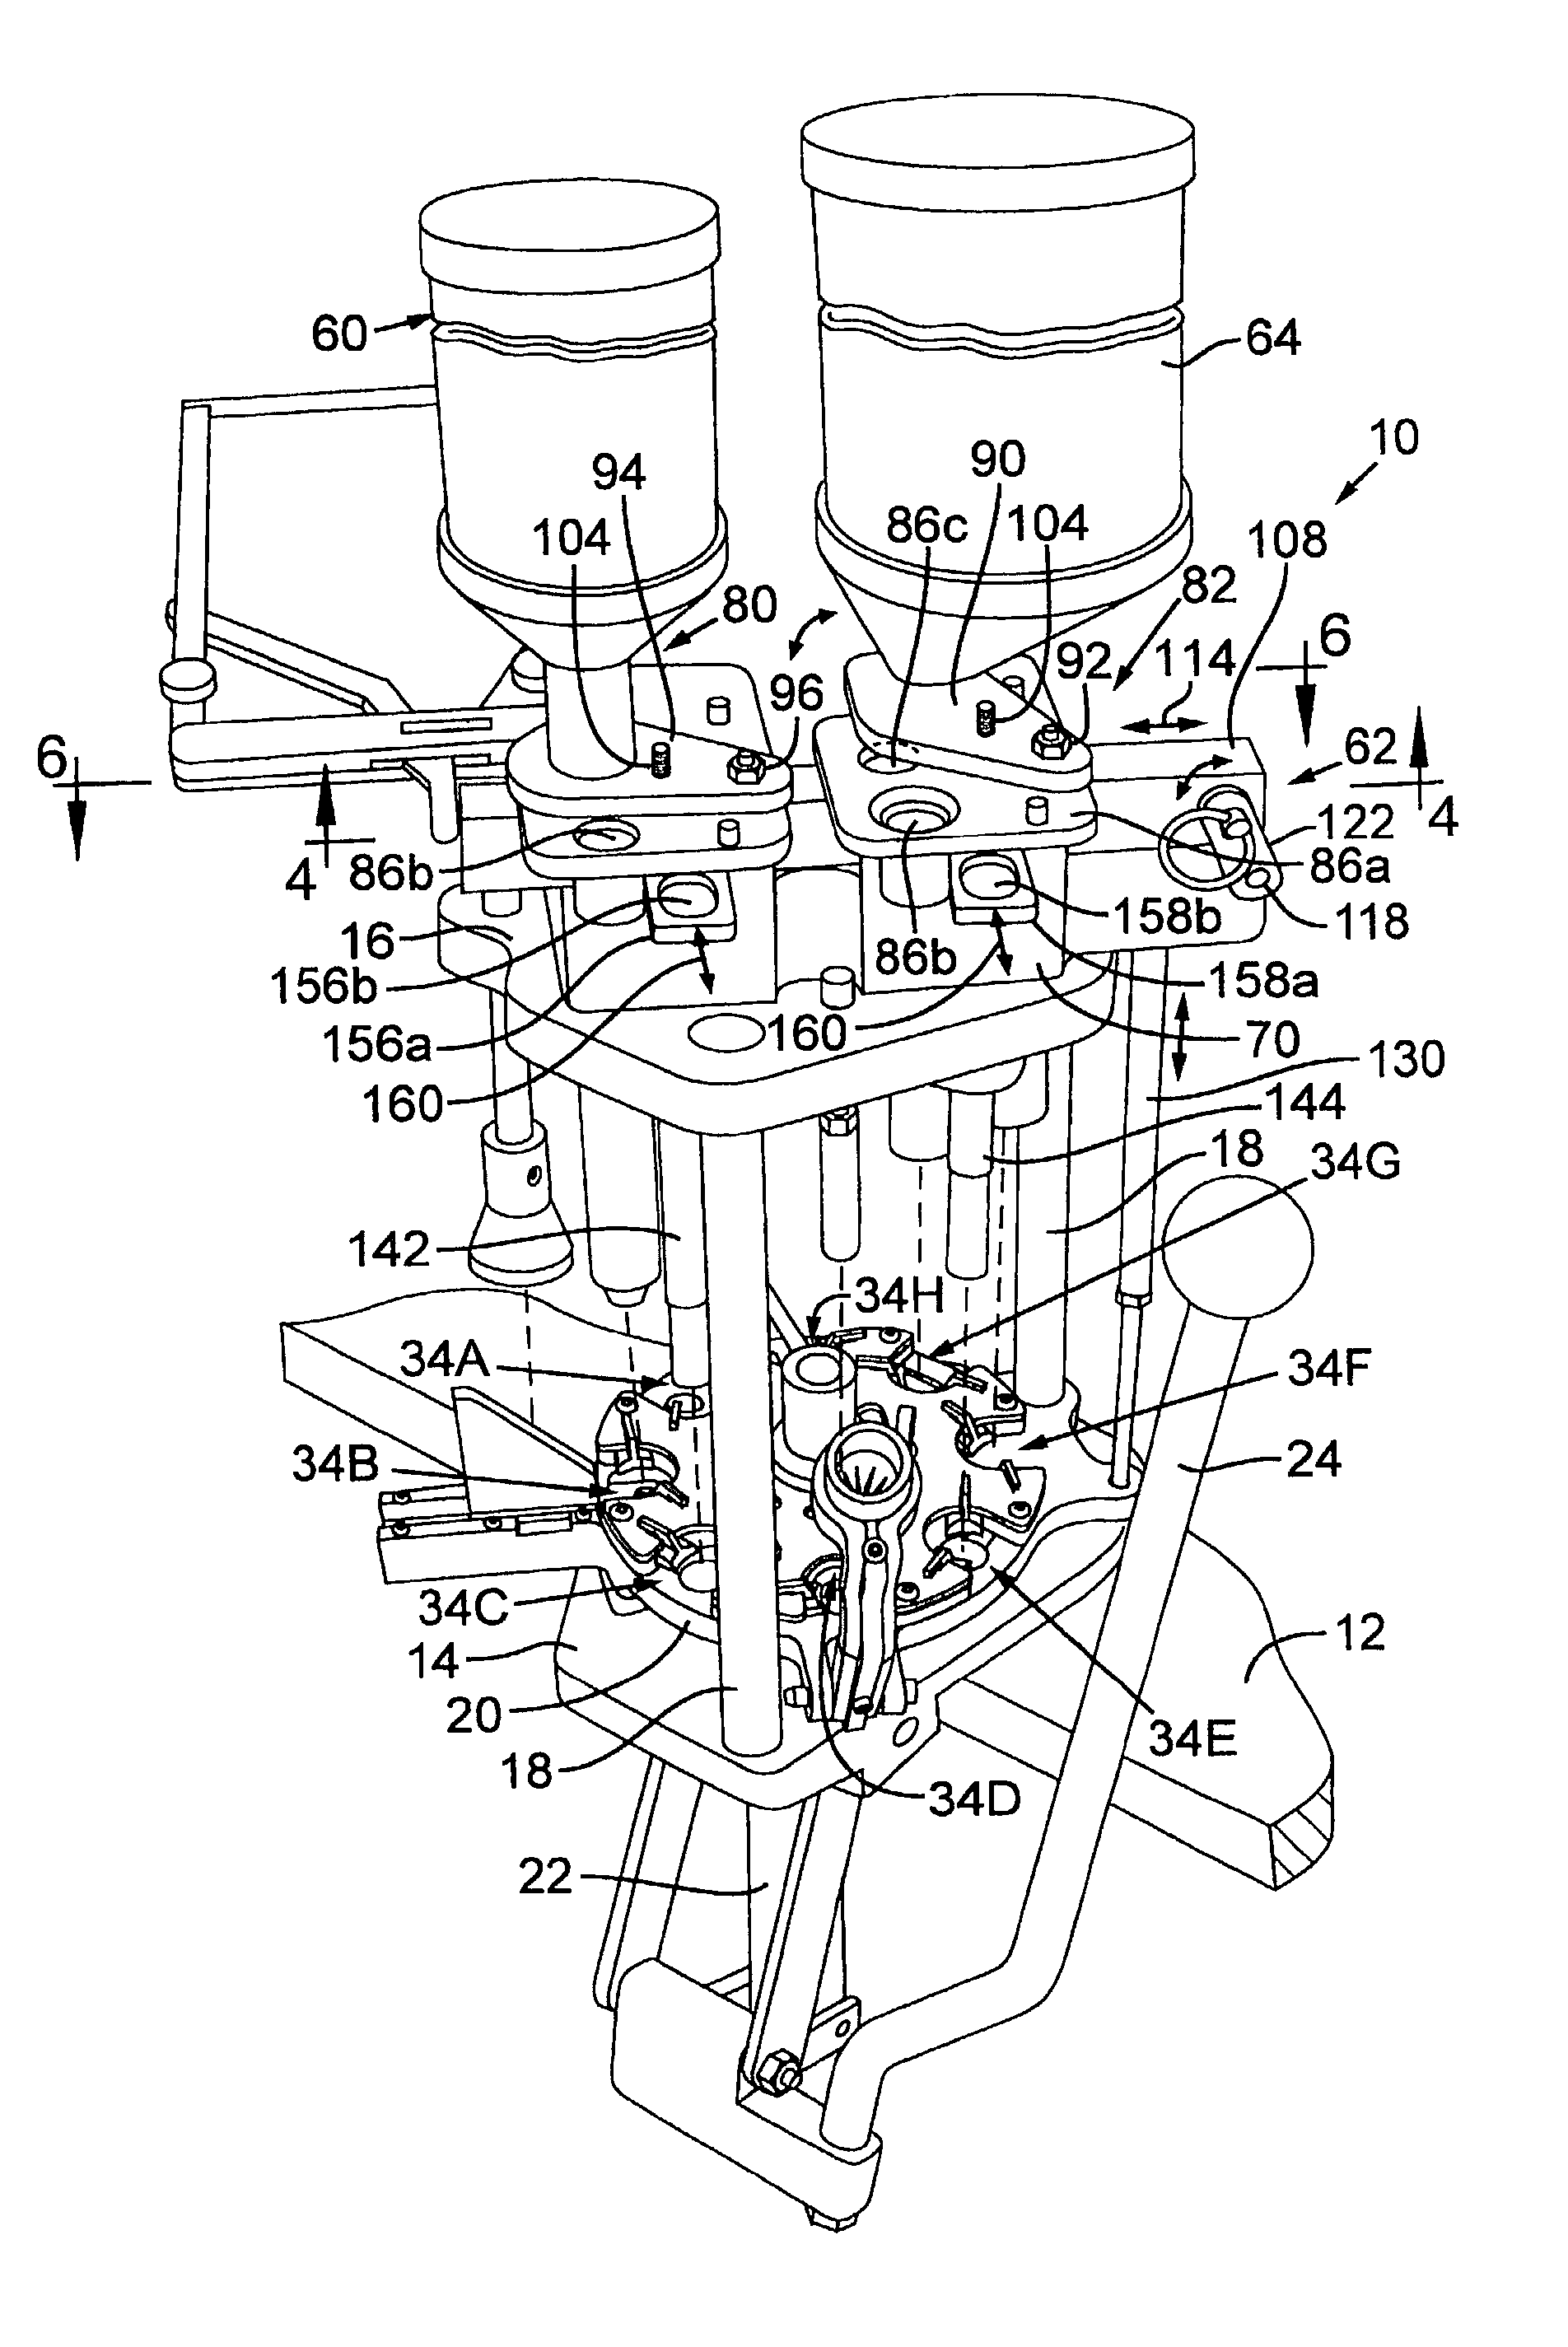 Ammunition reloading apparatus with feed mechanism